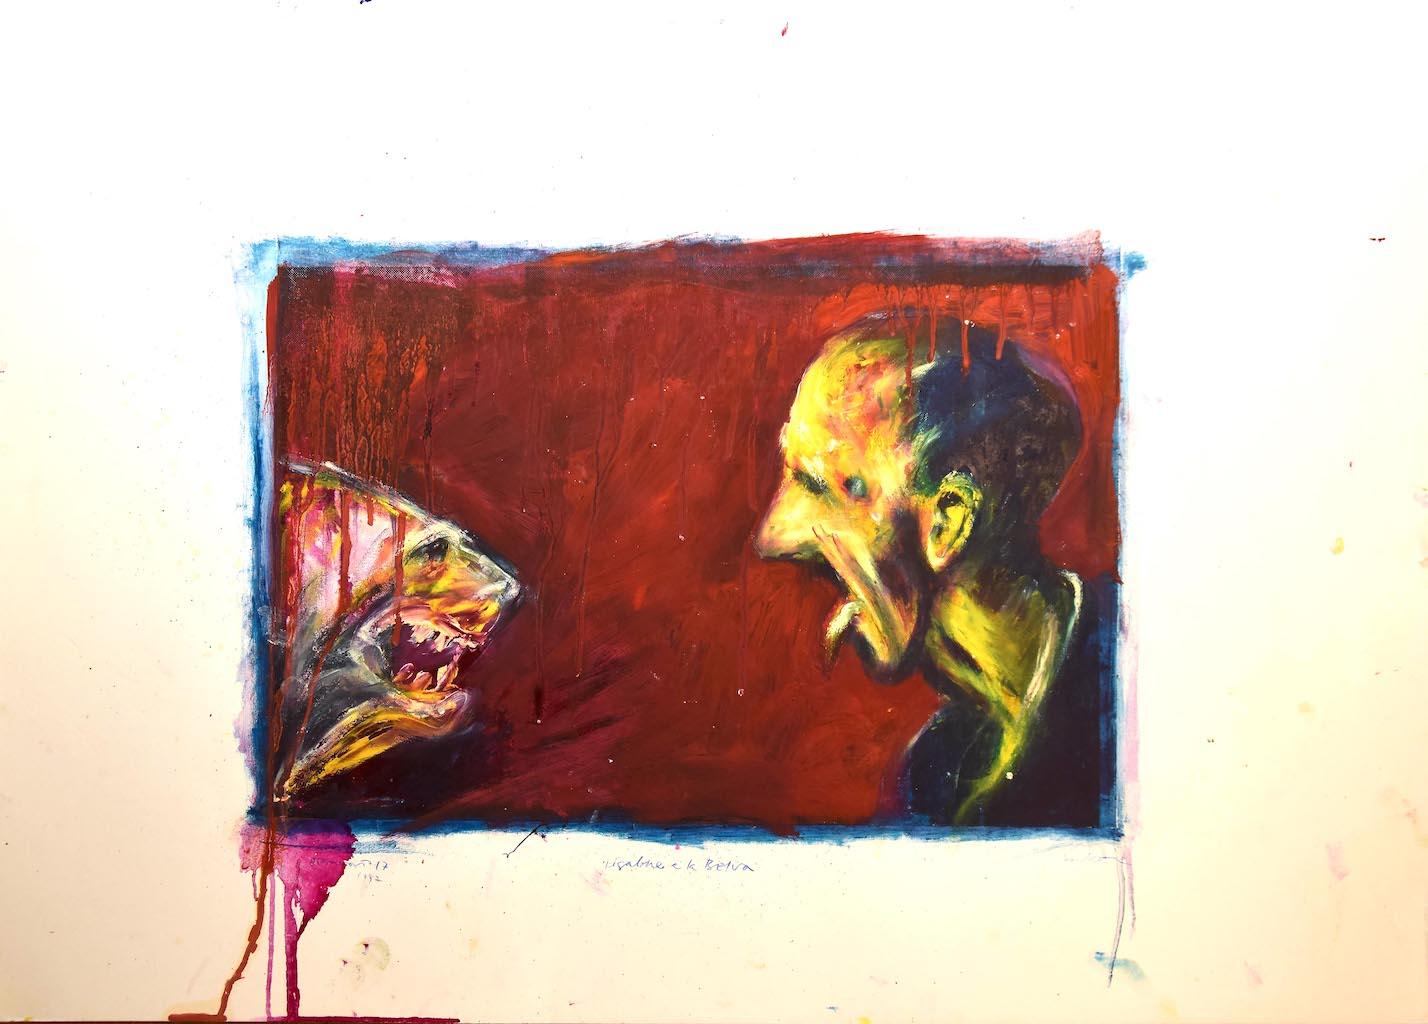 The Scare is an original painting realized by Sergio Barletta in 1997.

Applied on passepartout: 51 x 72 cm. Image Dimensions: 30 x 43 cm

Hand-signed on the lower left.

In good conditions, except for small folding along the left margins which do